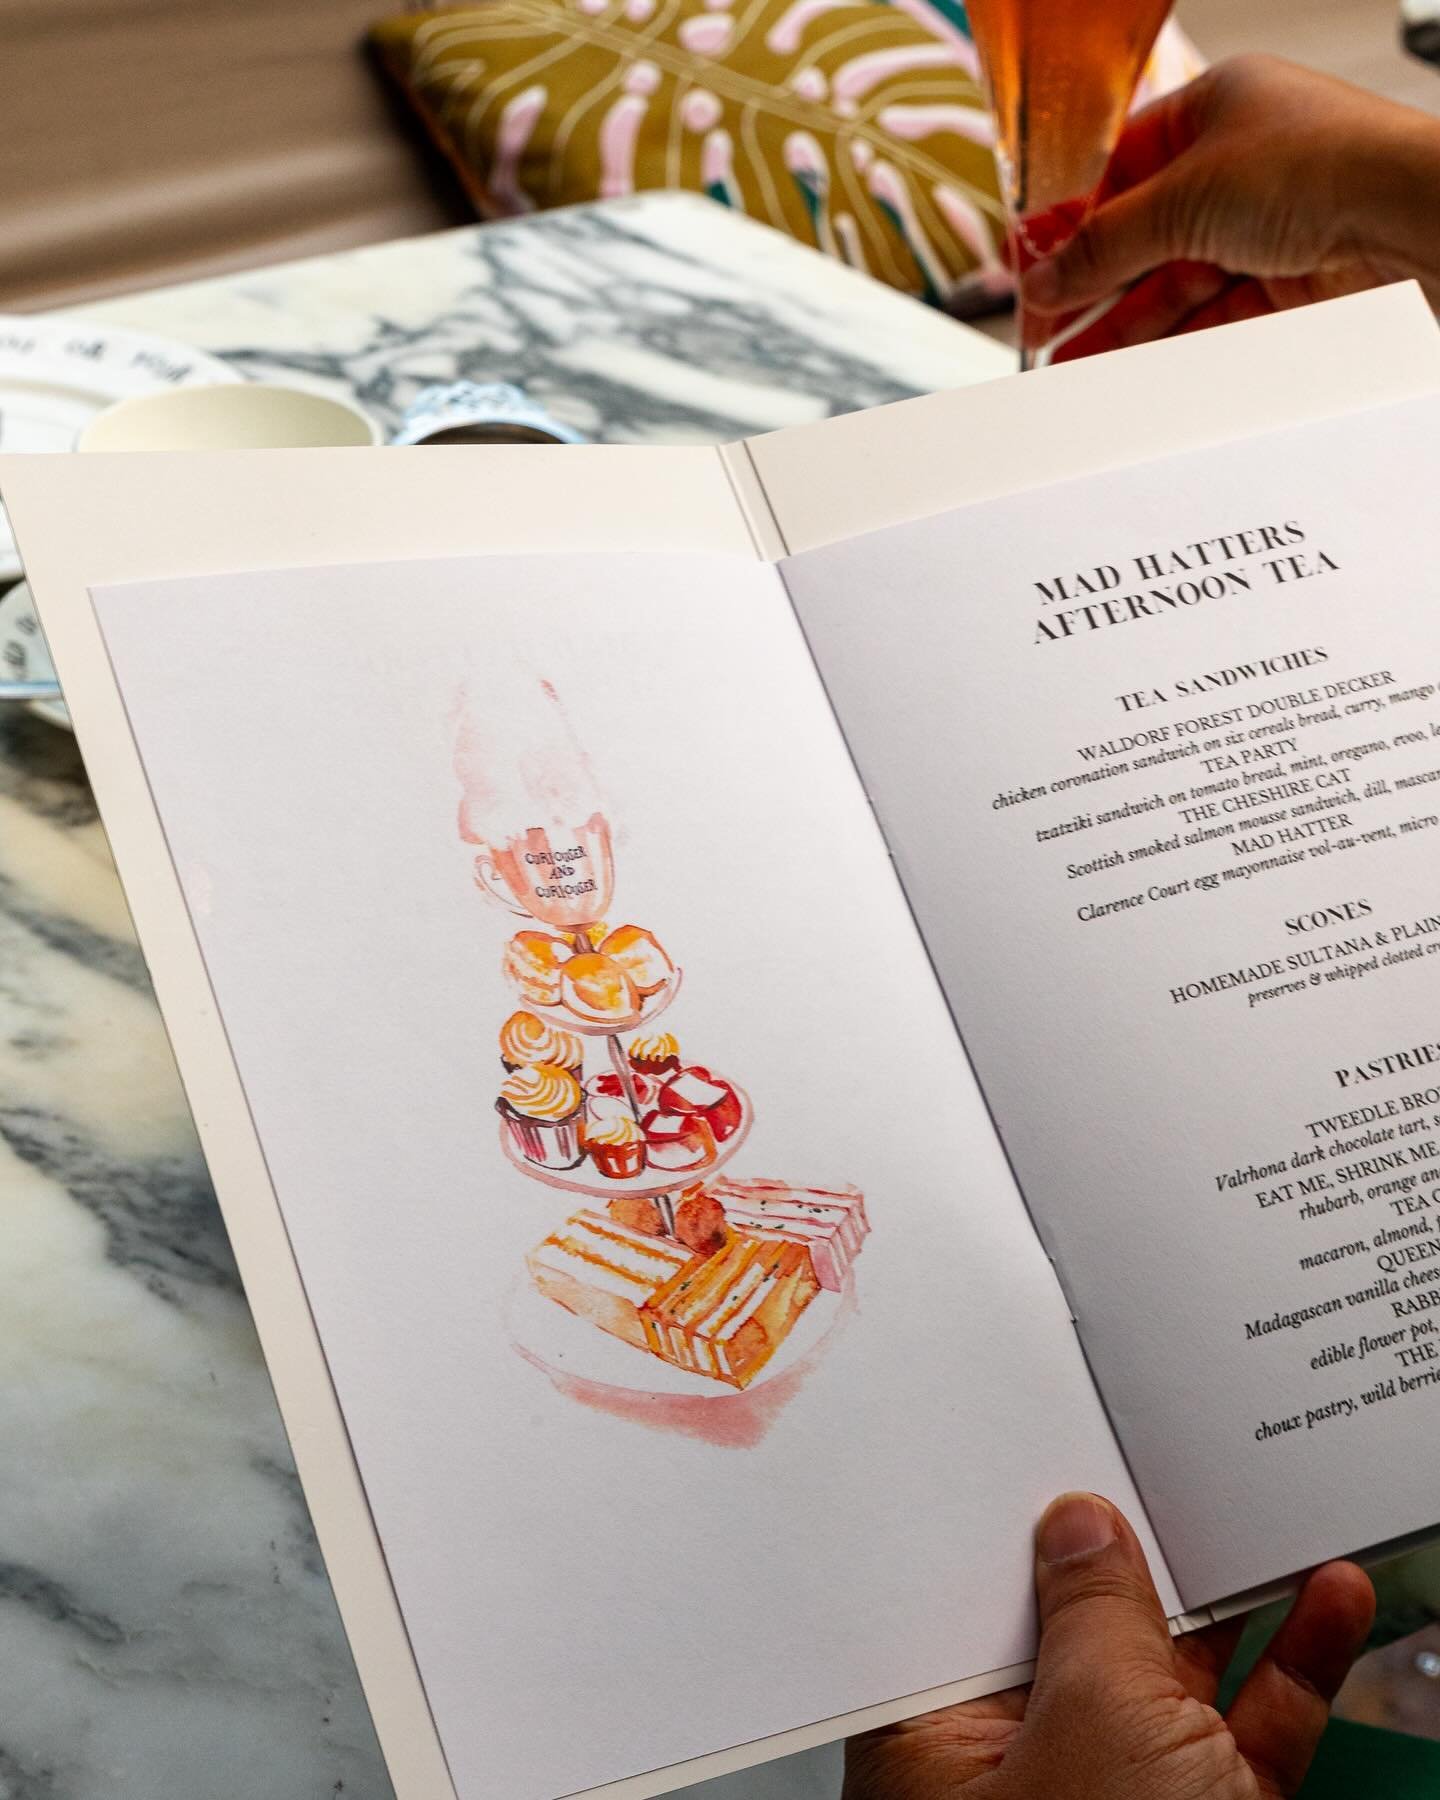 🌟 I was surprised but delighted when a client from two prestigious hotels reached out after seeing my &lsquo;Tinned Fish&rsquo; illustration, perfect for their luxury afternoon tea menus. 🎨✨ The Sanderson Hotel @sandersonsocial and Saint Martins La